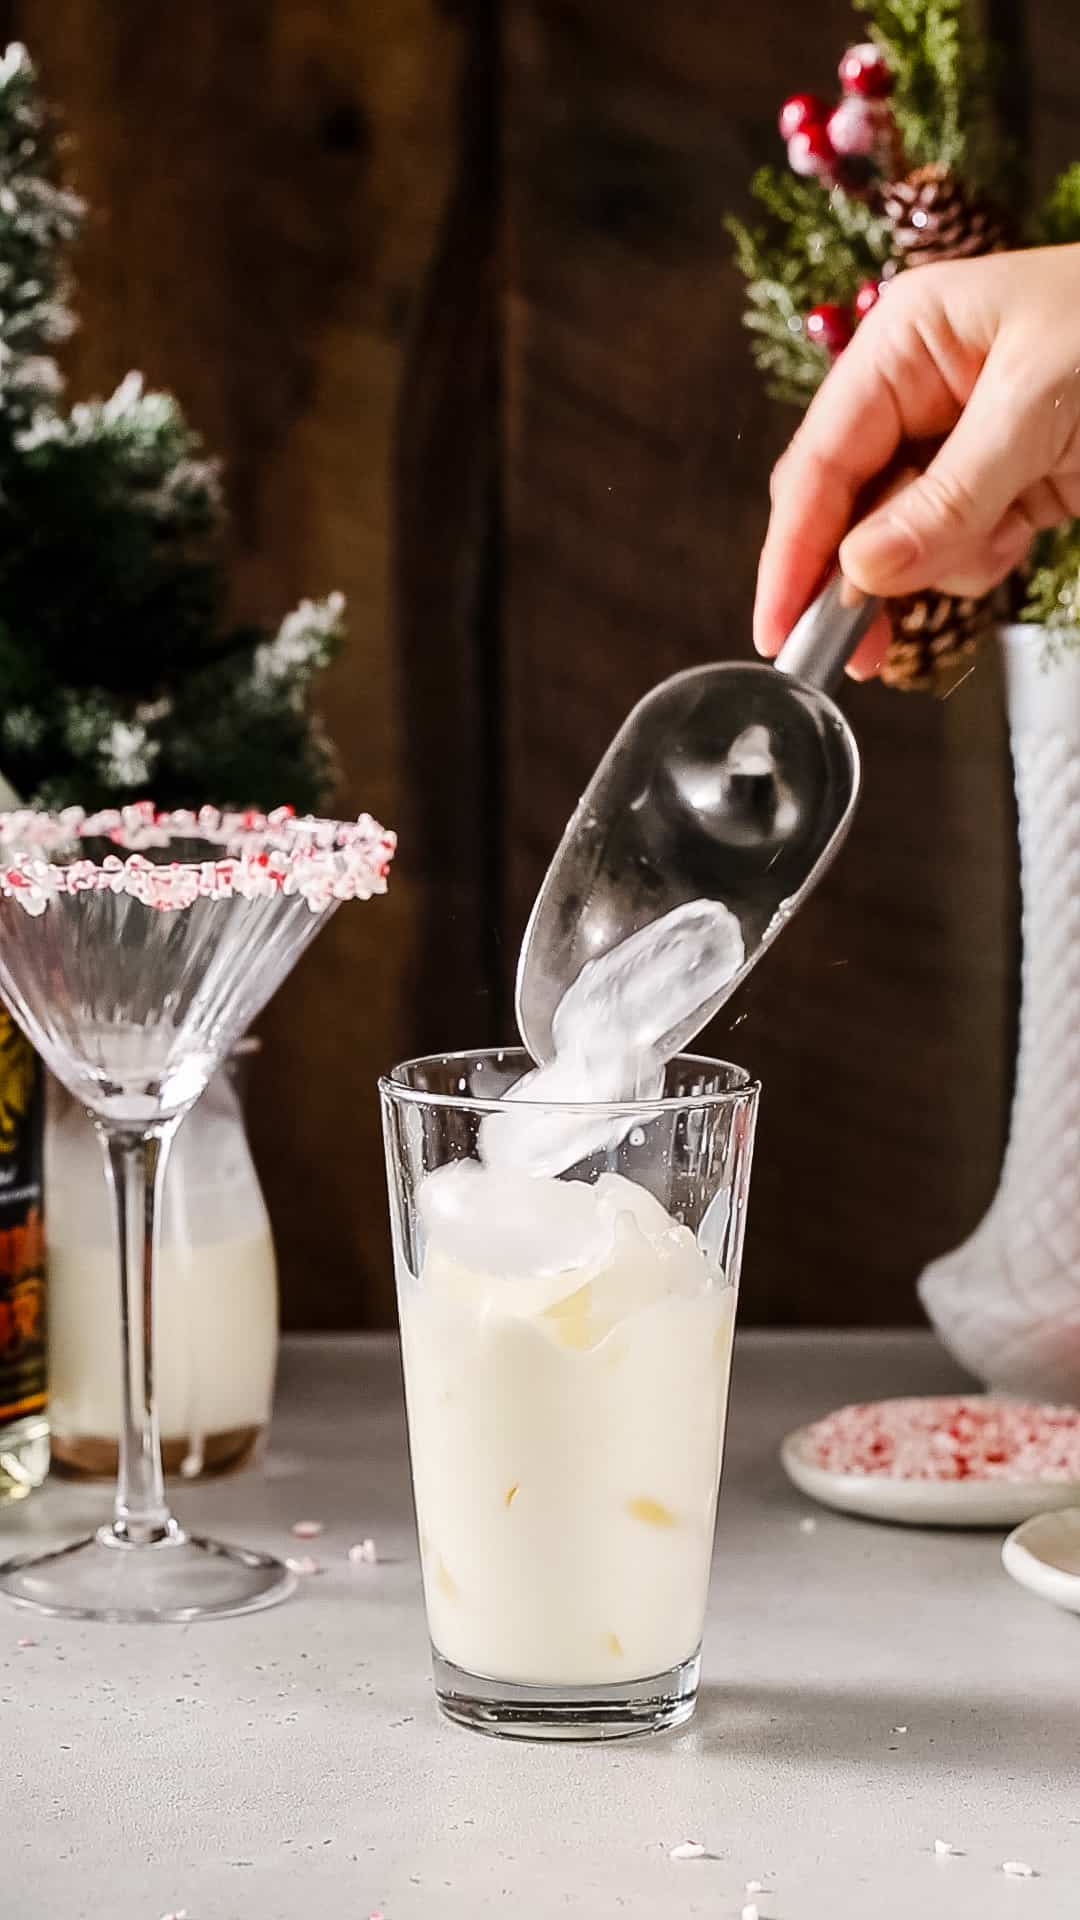 Hand using an ice scoop to add ice to a glass cocktail shaker filled with white creamy liquid.